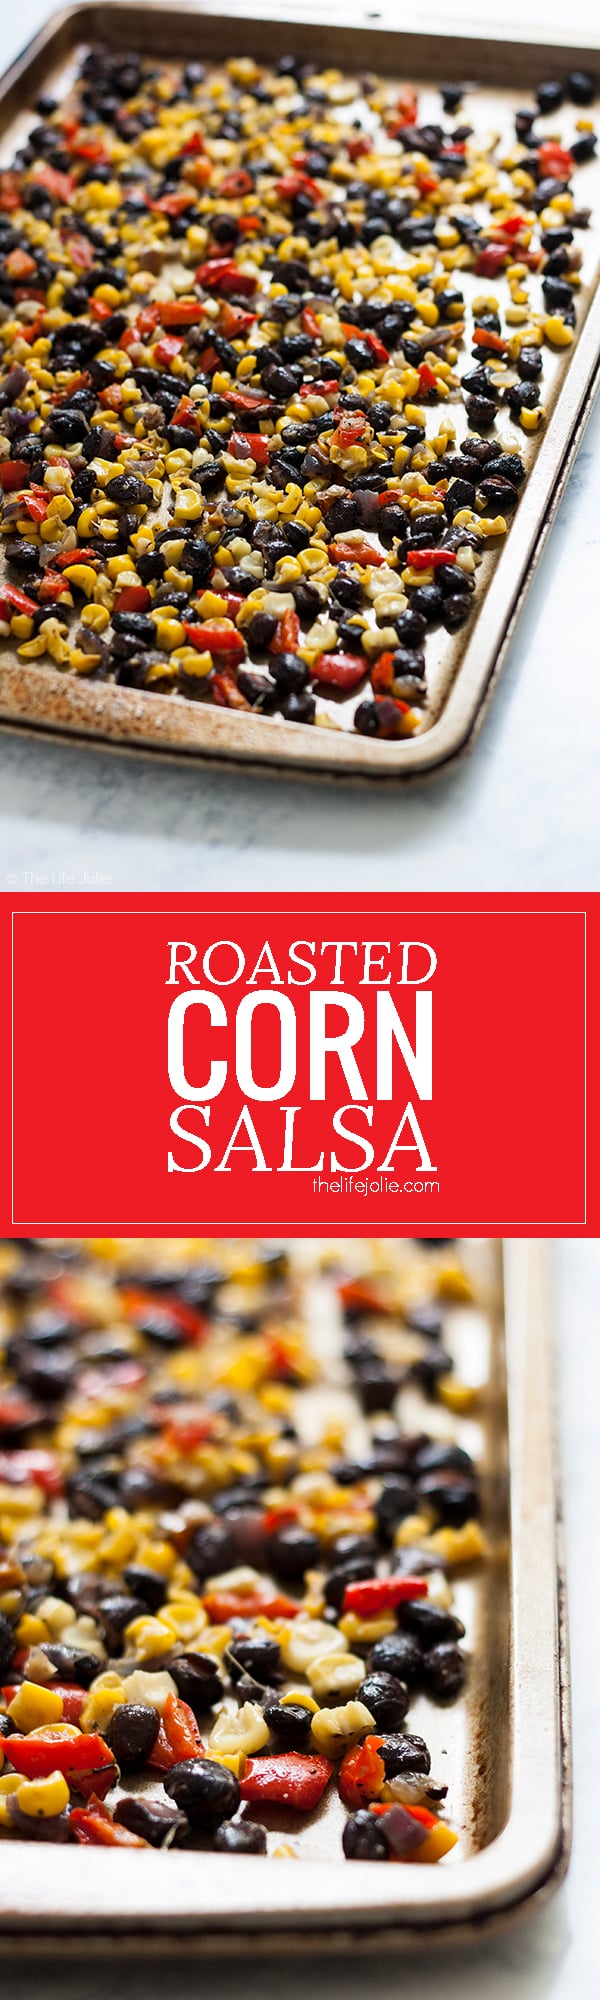 This Roasted Corn Salsa recipe is an easy and healthy addition to a salad, meat based dinner entree or eggs in the morning. It's homemade with black beans, fresh corn, onions and peppers- I seriously love this so much I now keep a container of it in my refrigerator to use throughout the week!